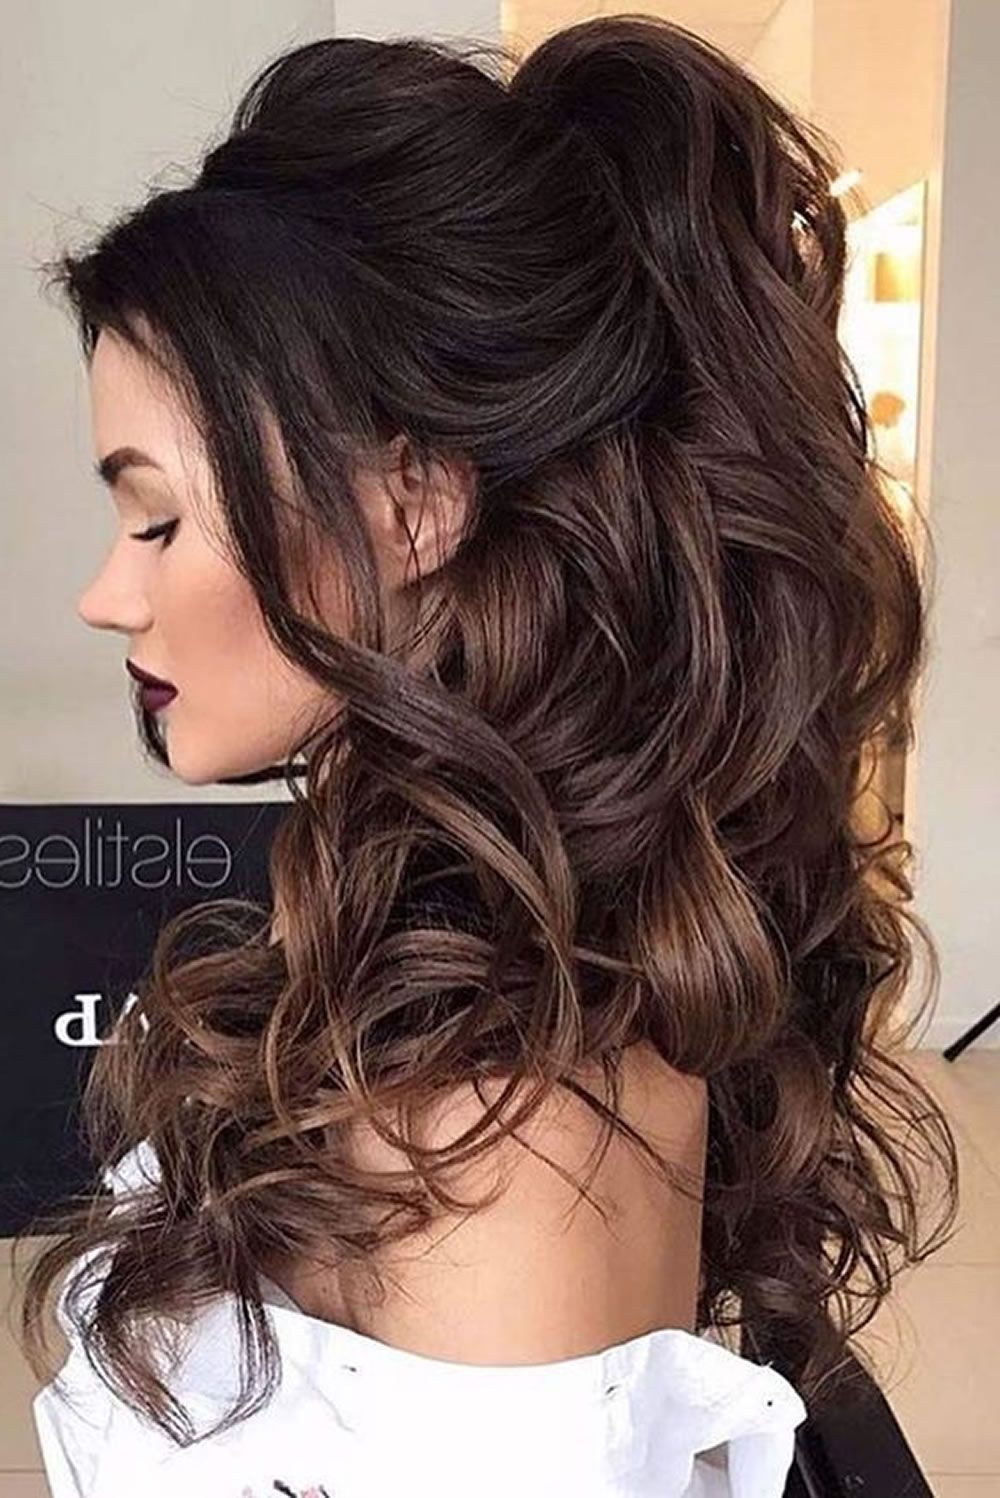 Christmas Party Hairstyles For 2018 & Long, Medium Or Short Hair Inside Short Hairstyles For Christmas Party (View 4 of 25)